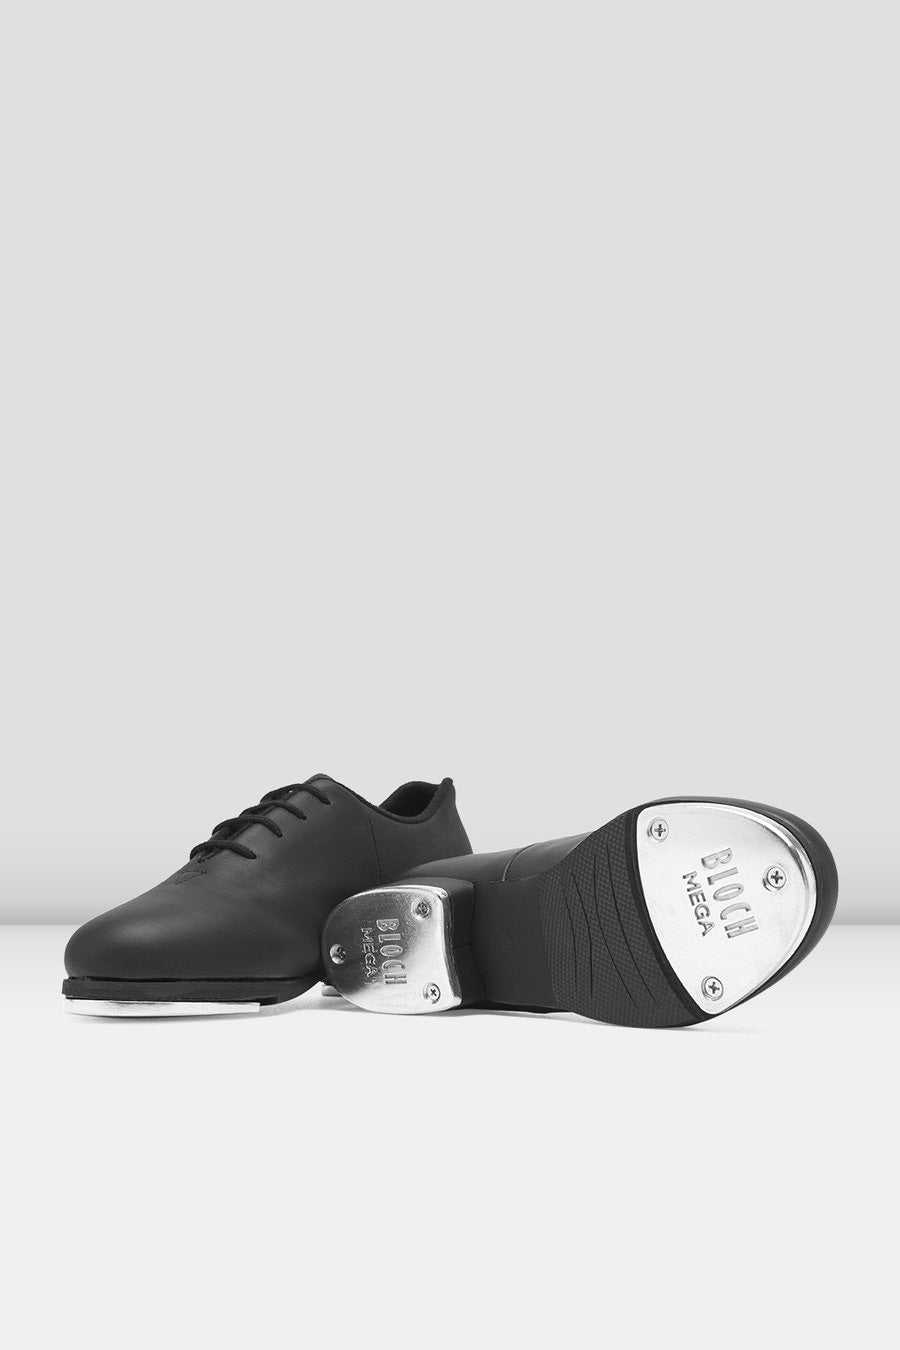 Bloch Sync Leather Tap Shoe